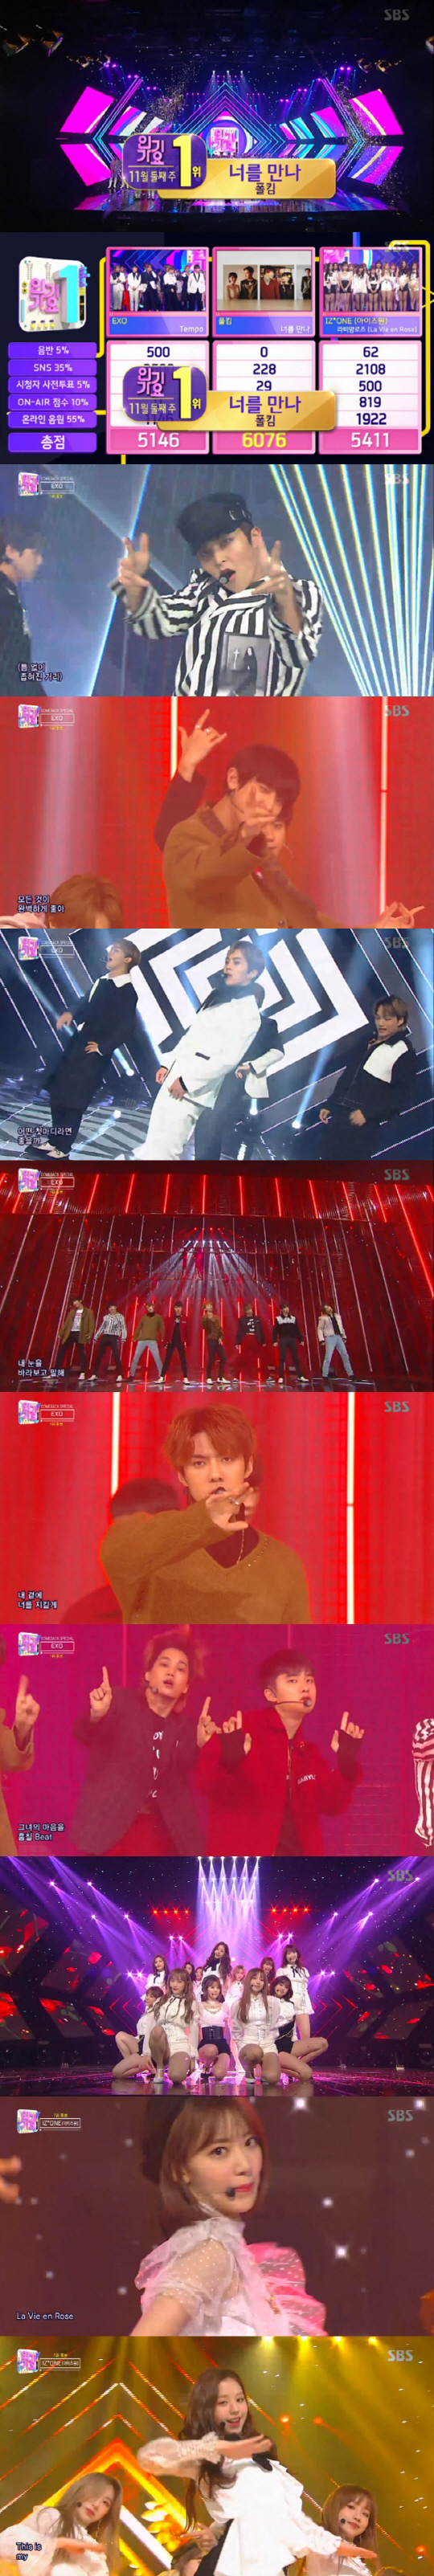 <p>11 live broadcast with SBS Inkigayo in the 1st place candidate EXO tempo{code:404,message:Maximum daily tra to meet you, La Vie EN Roseclash. Result {code:404,message:Maximum daily tra this appeared no 1st place trophy.</p><p>{code:404,message:Maximum daily tra to meet youlove to meet people who were happy moments and uneasy moment, and together to go forward of time to our own song.</p><p>EXO is a regular 5 house DONT MESS UP MY TEMPOcomeback and at the same time on various music charts, No. 1 on the hot popularity proven. EXO is the title song Tempopowerful performance. Tempolove her melodyfor her and the tempo of Dont interfere with the attractive alert contains songs. EXO is a touching momentuntil all the songs with the stage lines.</p><p>This child size garden white and black in combination with the  - clean simple yet elegant stage directing. La Vie EN Rosein French rosy lifeand the members enthusiasm as all of life is rosy into the water they will each see the message of the song.</p><p> This day TWICE and K. and Person Height and multiplication, such as colorful stage a comeback unfolded. TWICE the Divine Comedy YES or YESto a comeback with a refreshing stage.</p><p>This time TWICEs new song YES or YESis the answer is YESand there is your answer, but if that cute confession contains songs. One youthful rhythm and dynamic the sound is very addictive. 10 consecutive mega-hit successfully TWICE is distinctive and sporty performance as the hearts of fans melt. In Japan, the activities for BDZ Korean version also unveiled.</p><p>Prestige foot brother K. is also the new song then its back toas.</p><p>This albums title song then its back tois purely love that times more beautiful and touching figure, in tune with the retro sound and trendy sound to the appropriate mix of the album moved more hybrid pop ballad. K. Will, writer and Director on all involved to complete the more then its back toa long period of time the breathing to match the temperature hit composer Kim Do Hoon, lyricist Kim or also as a facilitator contributed to.</p><p>SHINee Person Height is debut 10 years to make a solo album with back.</p><p>Person Height is the solo debut song Forever Yours(on server only) stage to the public. This day on the stage as participating owners together on a stage the Person Height to support prices. Two people of the tone boards and colorful charms out.</p><p>The charismatic look, confidence to Express new song Better-comments-typewith an upgraded, within a Park, but the. Members of the energetic vocals of course powerful choreographer of eyes and ears Caught.</p><p>Meanwhile, the popularin nature, dream, for kids, for Person Height American Person Height, Monsta X, April, Golden car, straight Person Height zu, Ye, seven English Clark, in this City, Museum of nature ... </p>